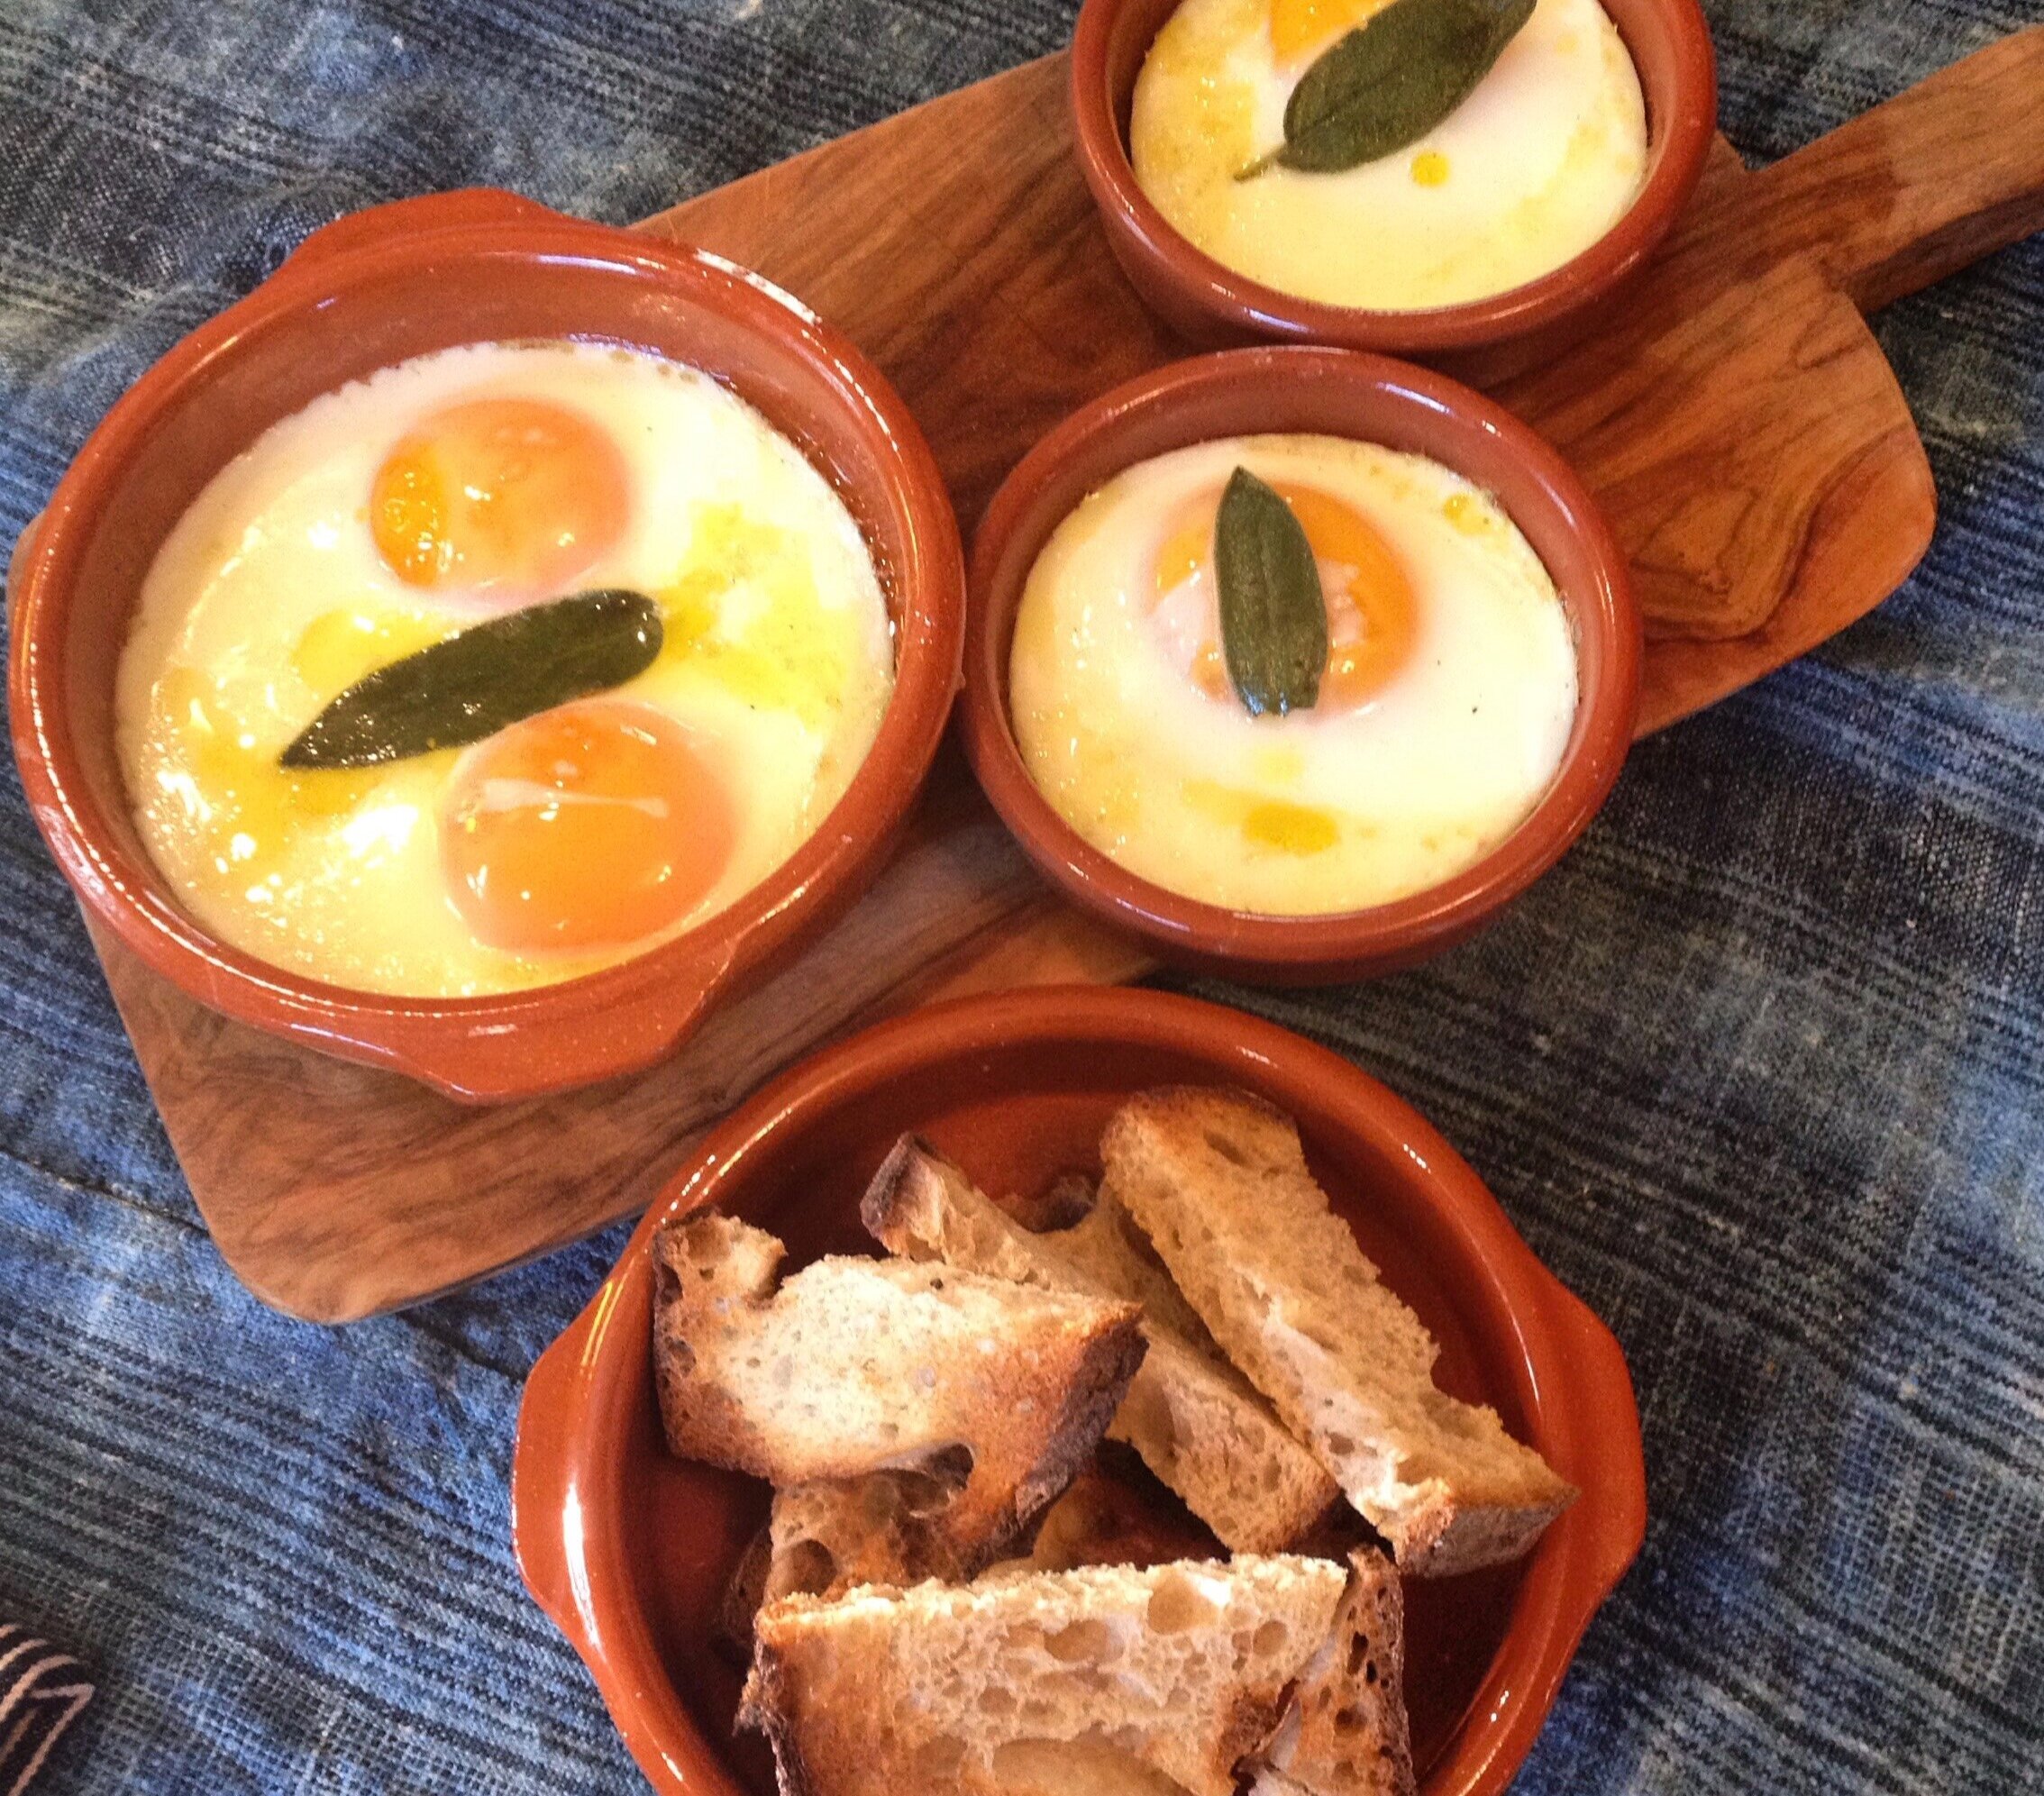 Baked eggs with toast soldiers